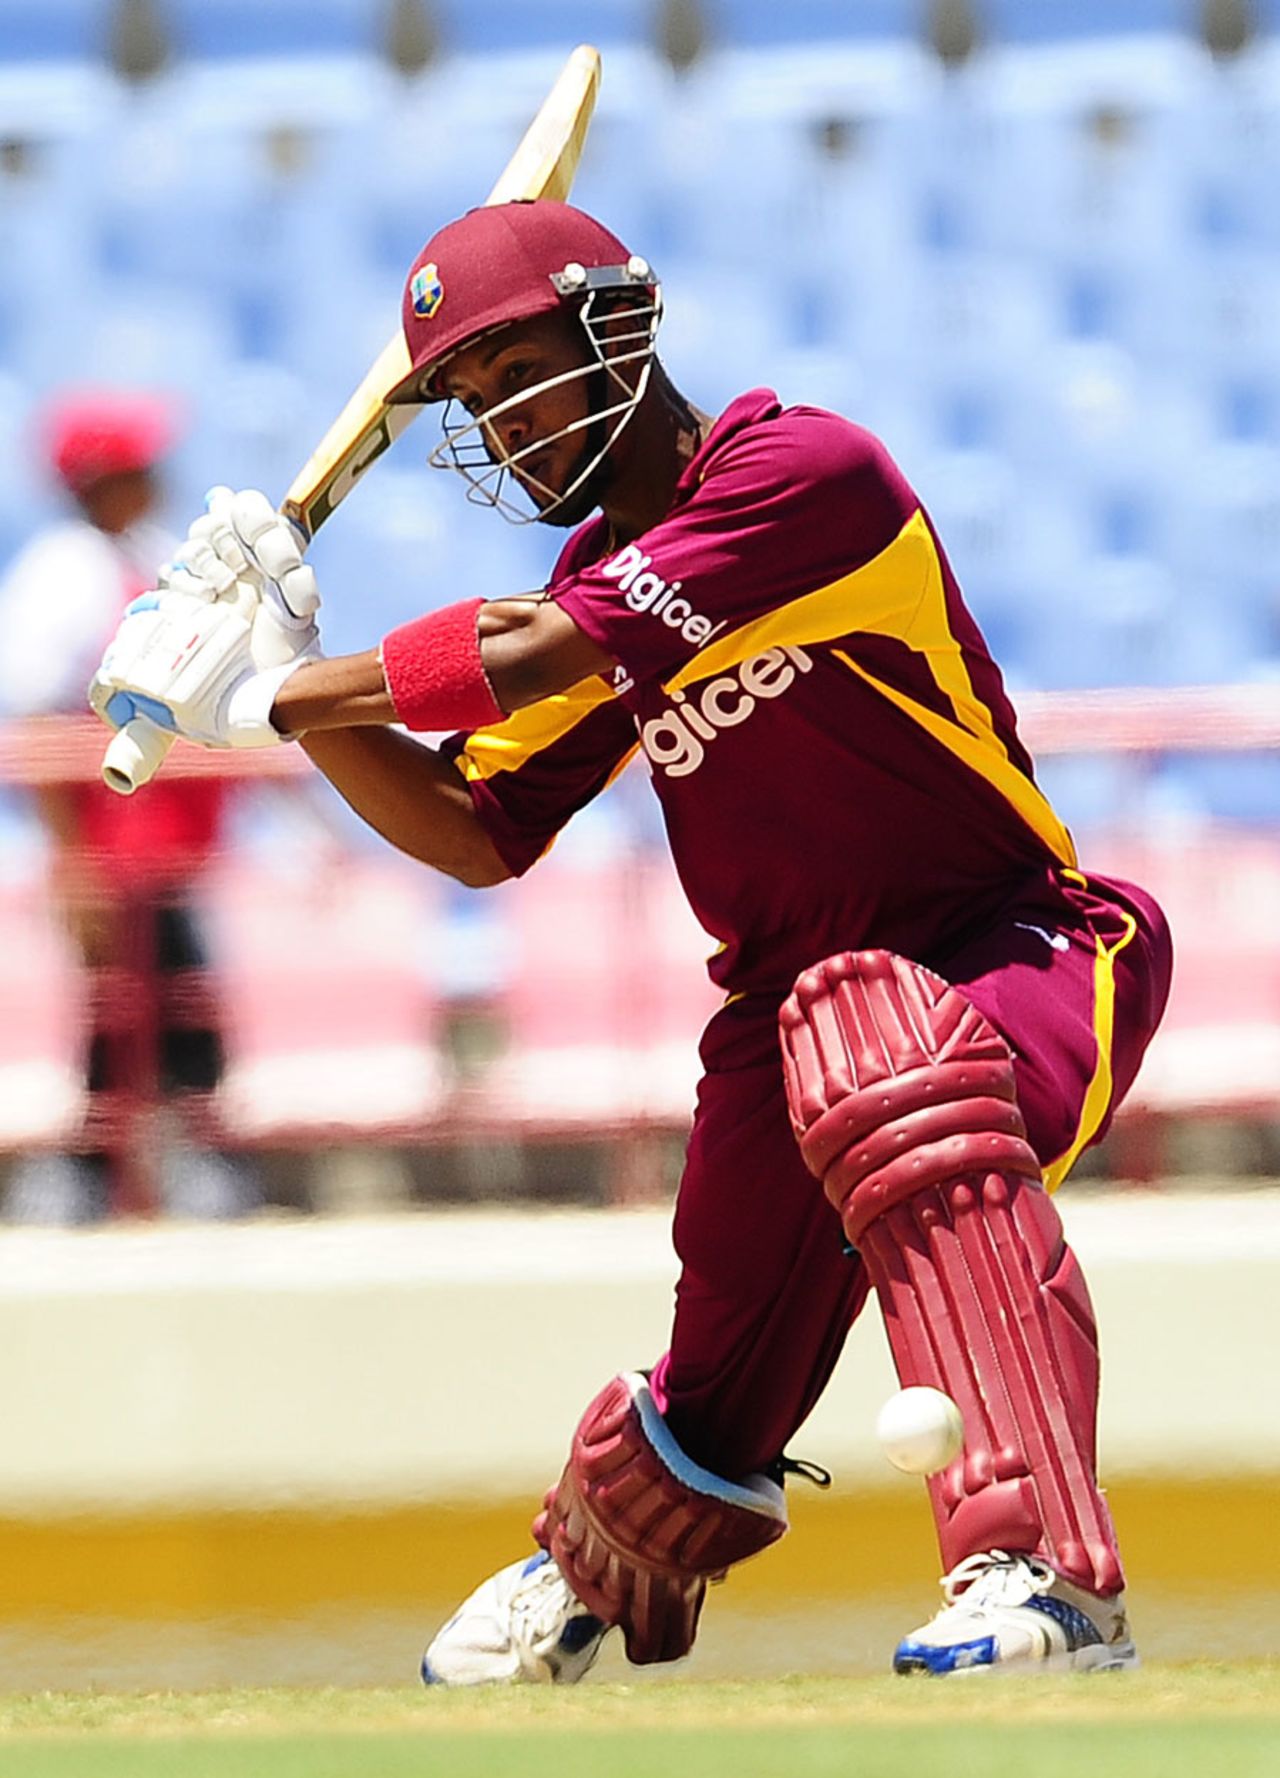 Lendl Simmons prepares to play an aggressive stroke, West Indies v Pakistan, 2nd ODI, Gros Islet, April 25, 2011